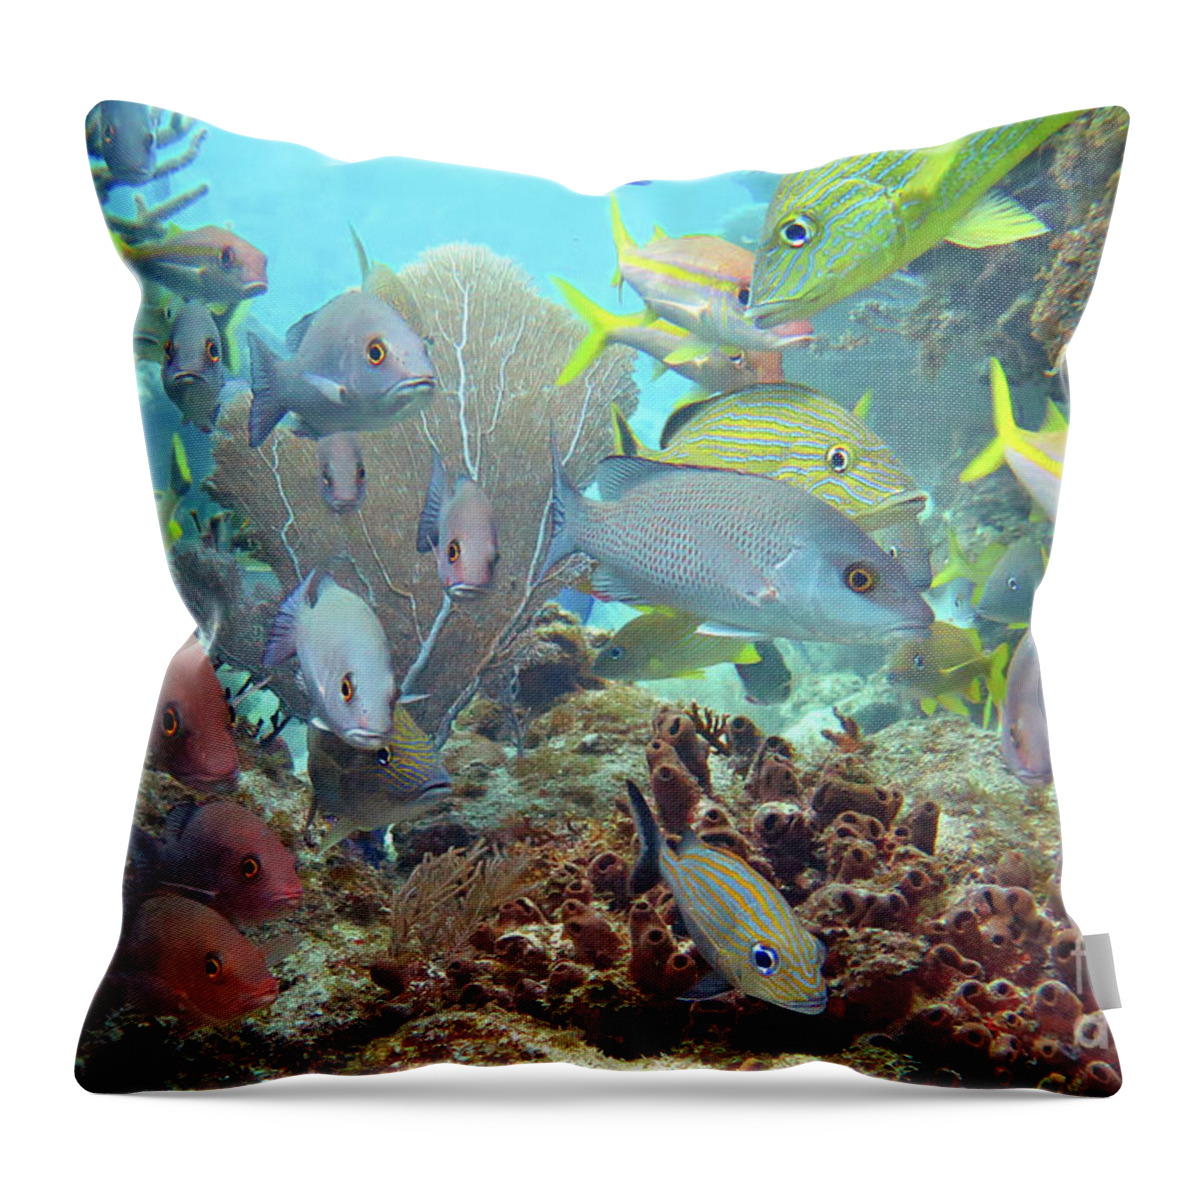 Underwater Throw Pillow featuring the photograph Molasses Reef by Daryl Duda